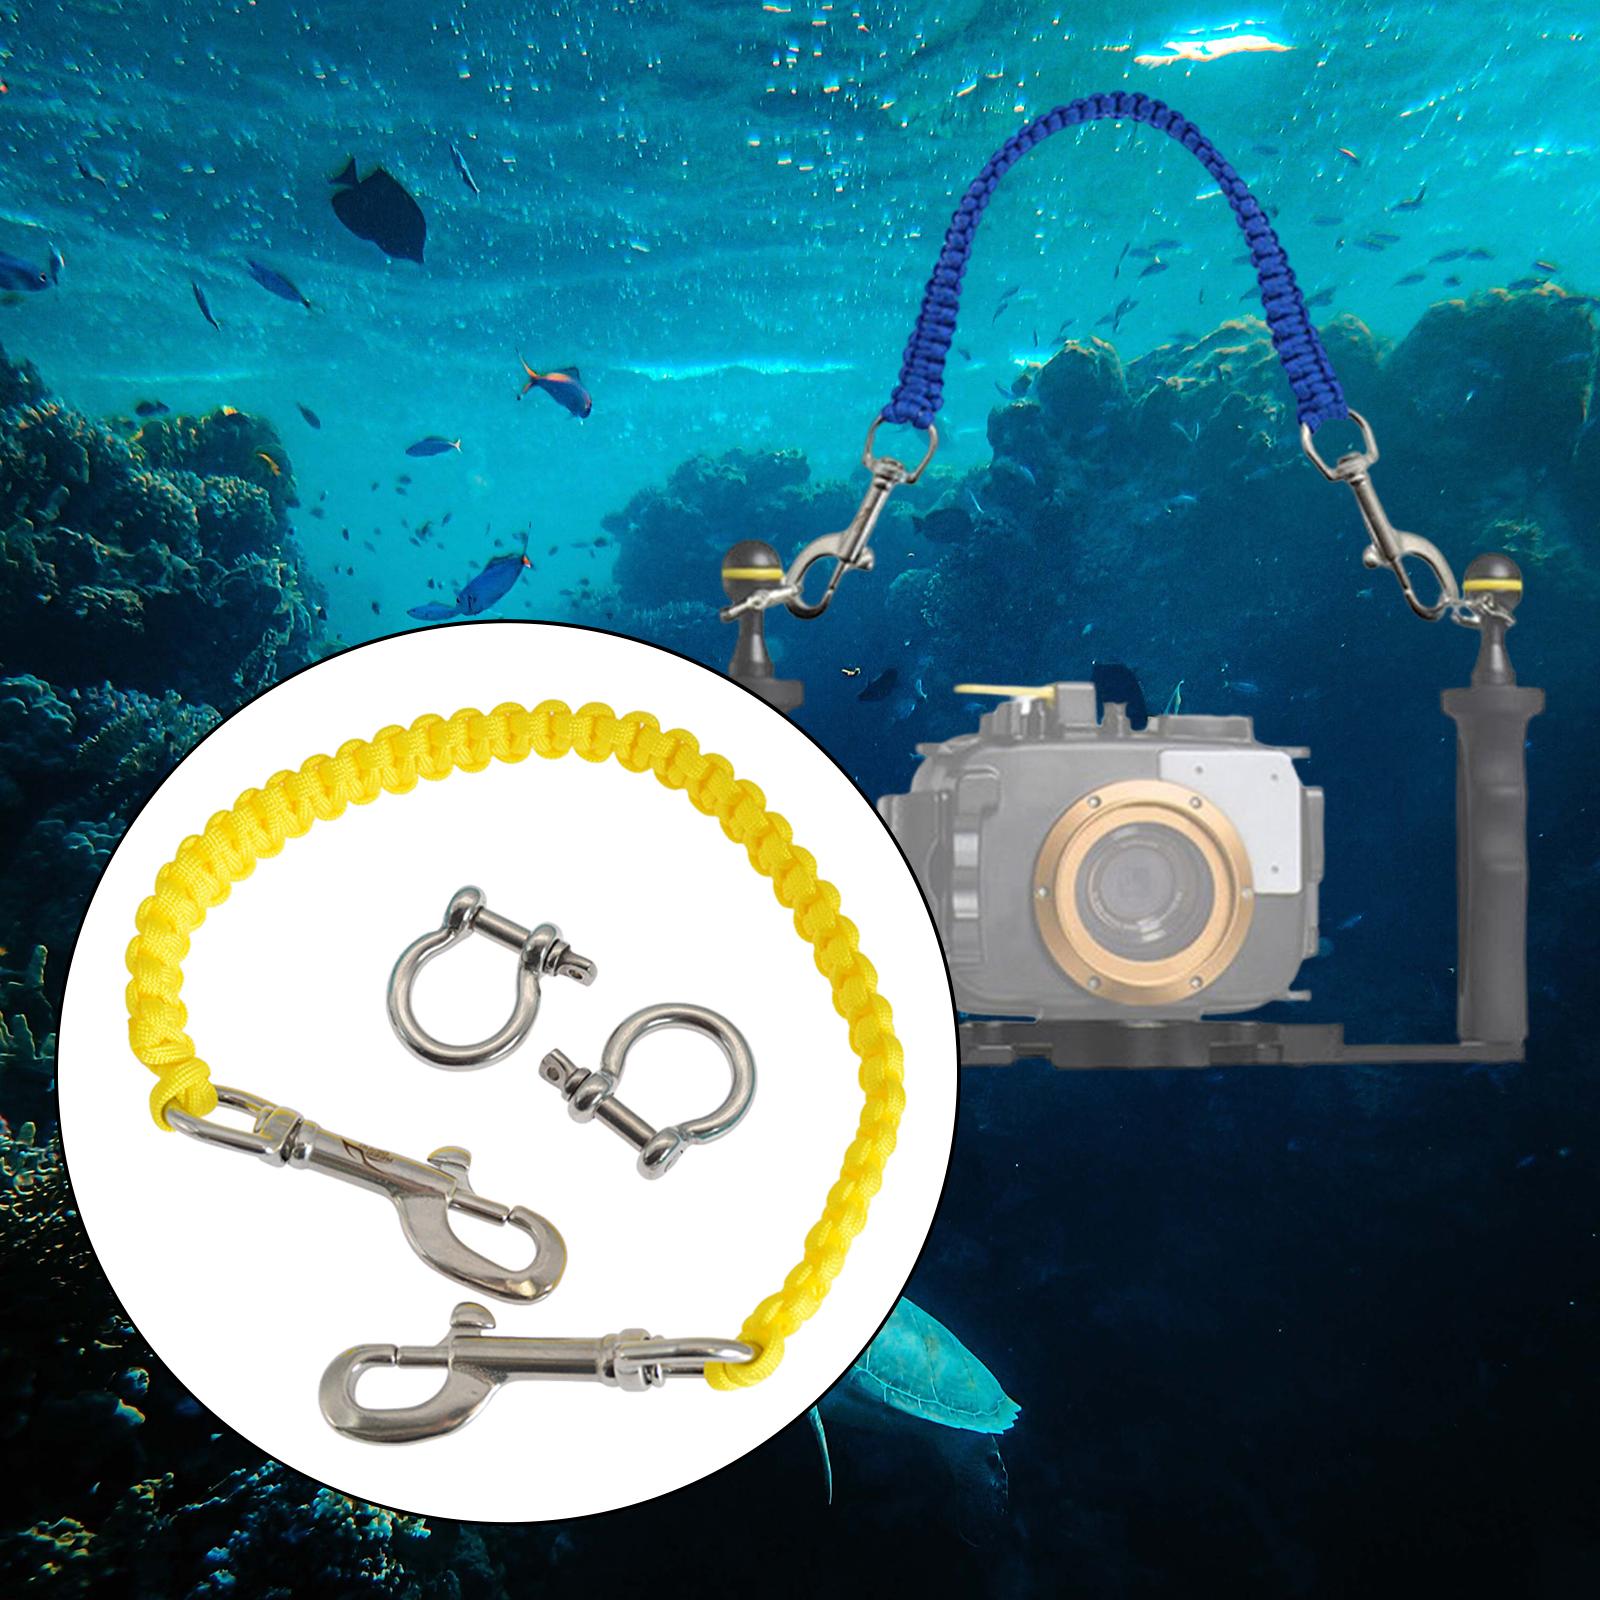 Diving Camera Hand Rope Lanyard Strap Underwater Photography Accessories yellow